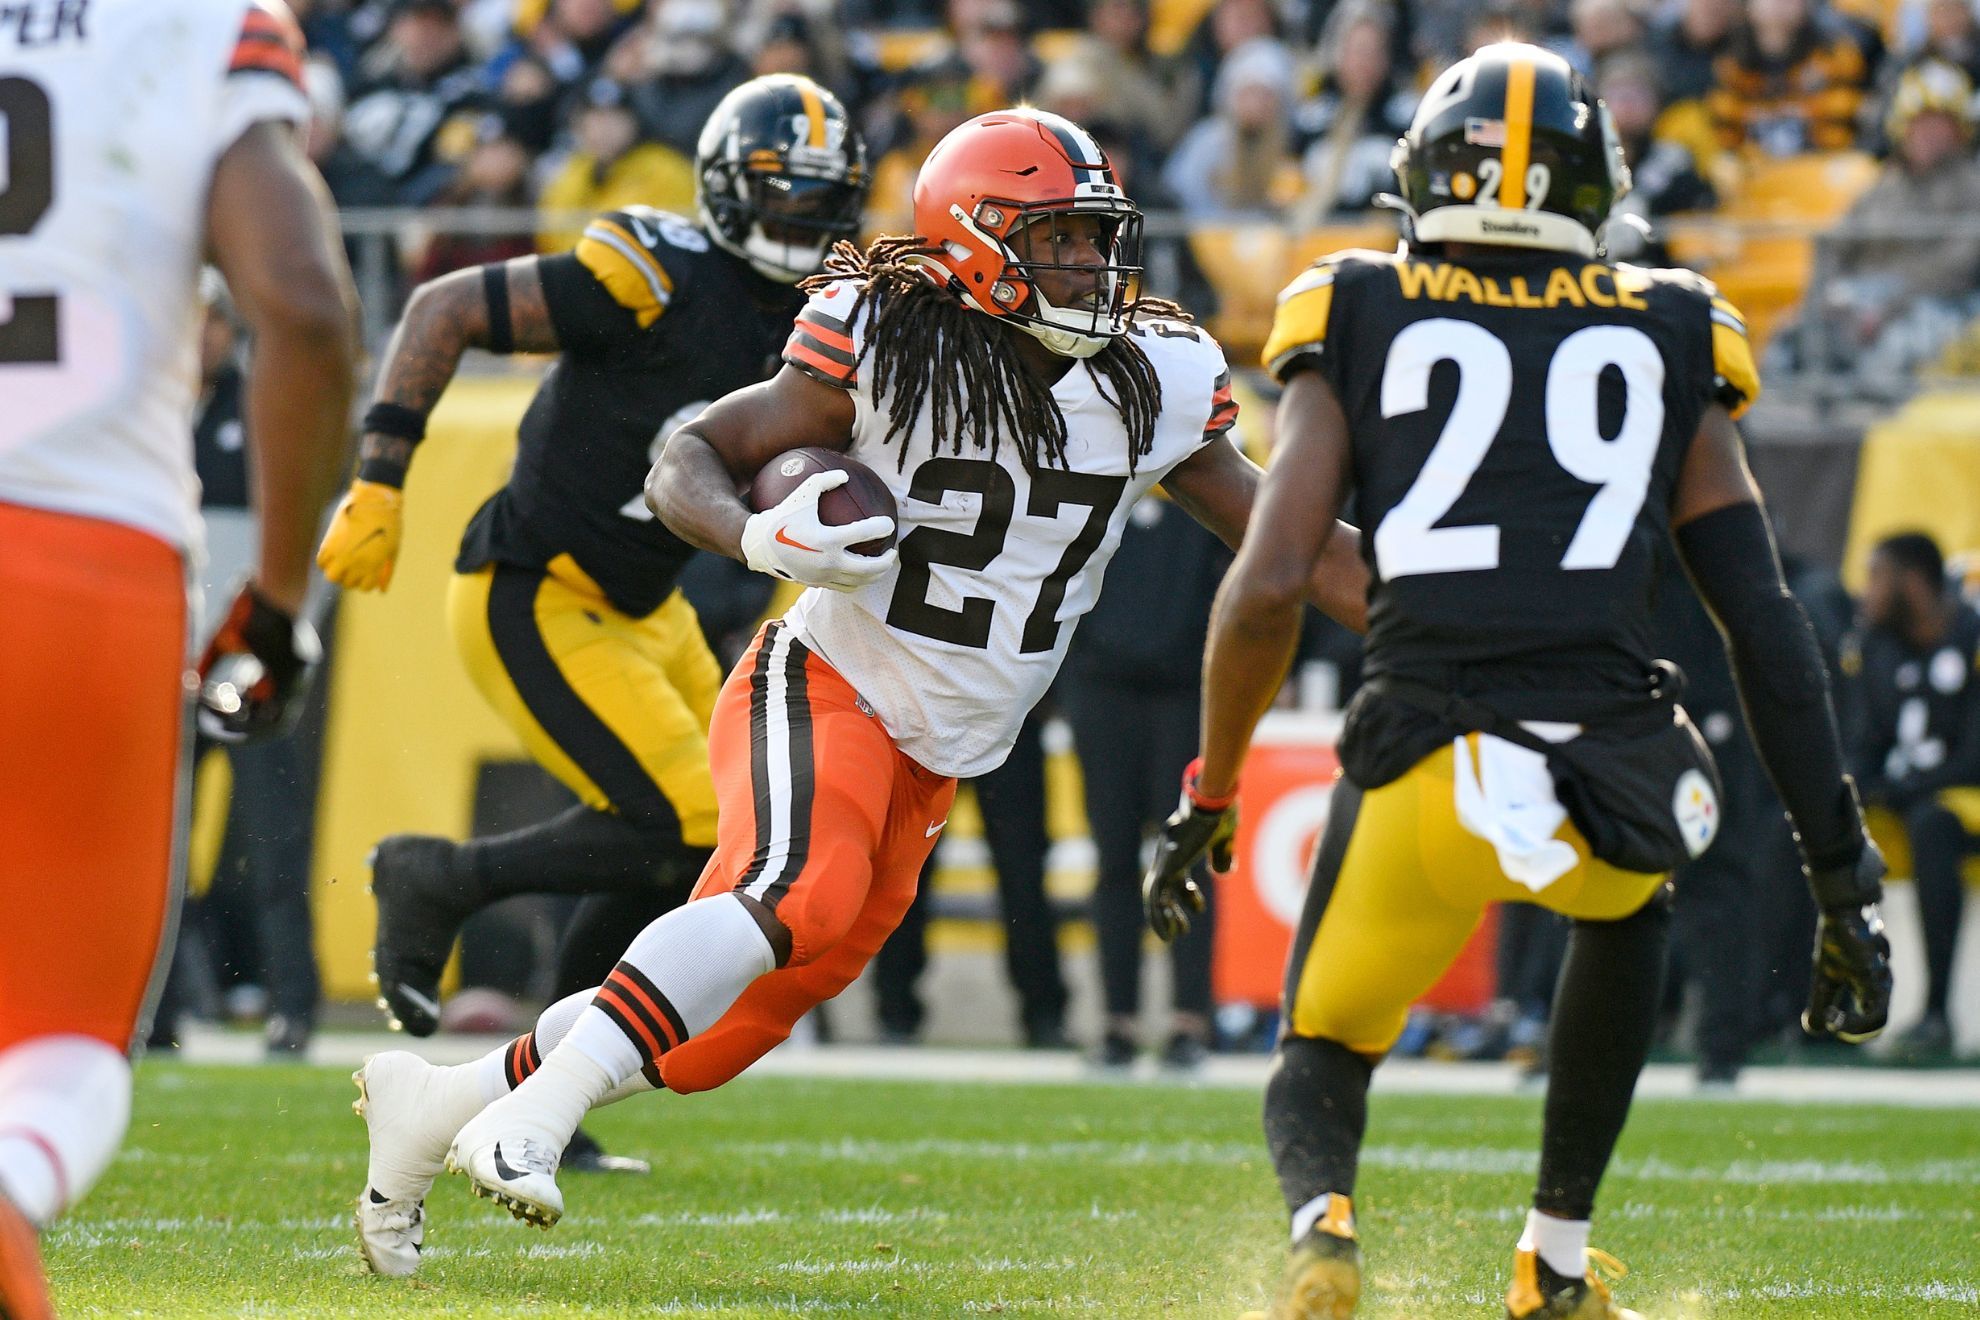 Kareem Hunt to return to Browns? List of available FA RBs amid Nick Chubb injury